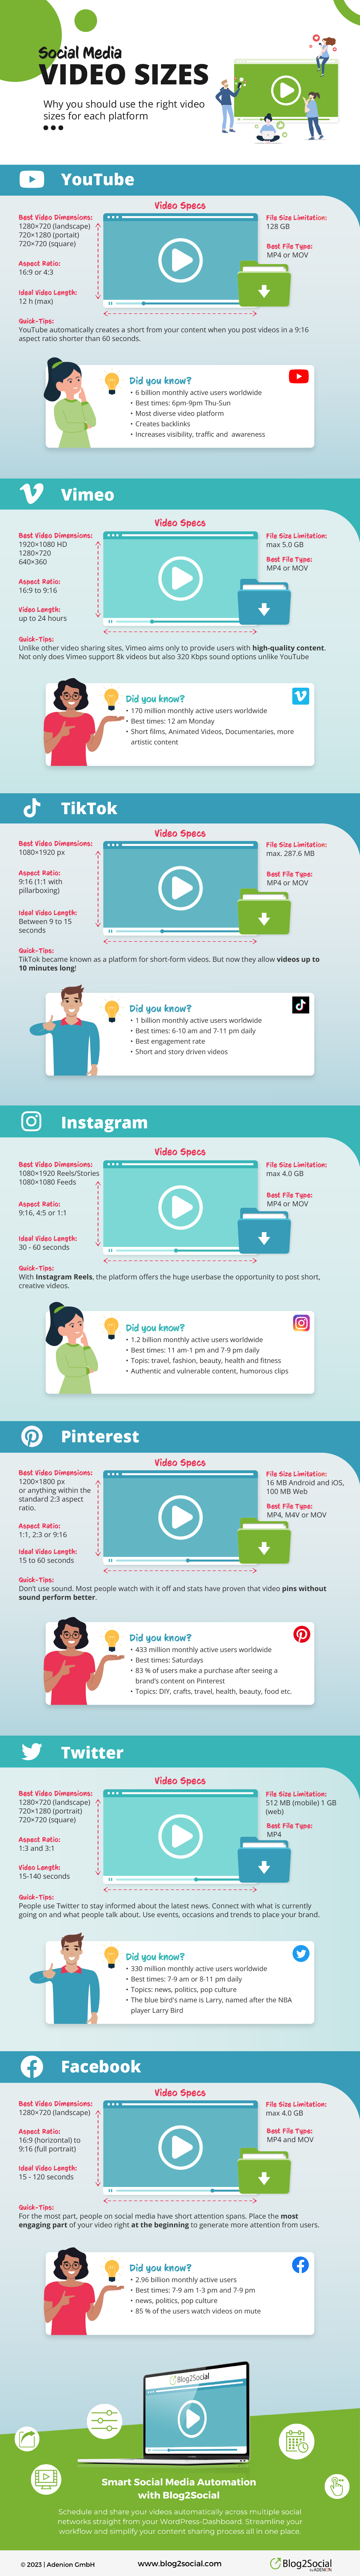 The Ultimate Social Media Video Guide: Sizes, Specs, and SEO Optimization for Successful Video Posts [Infographic]